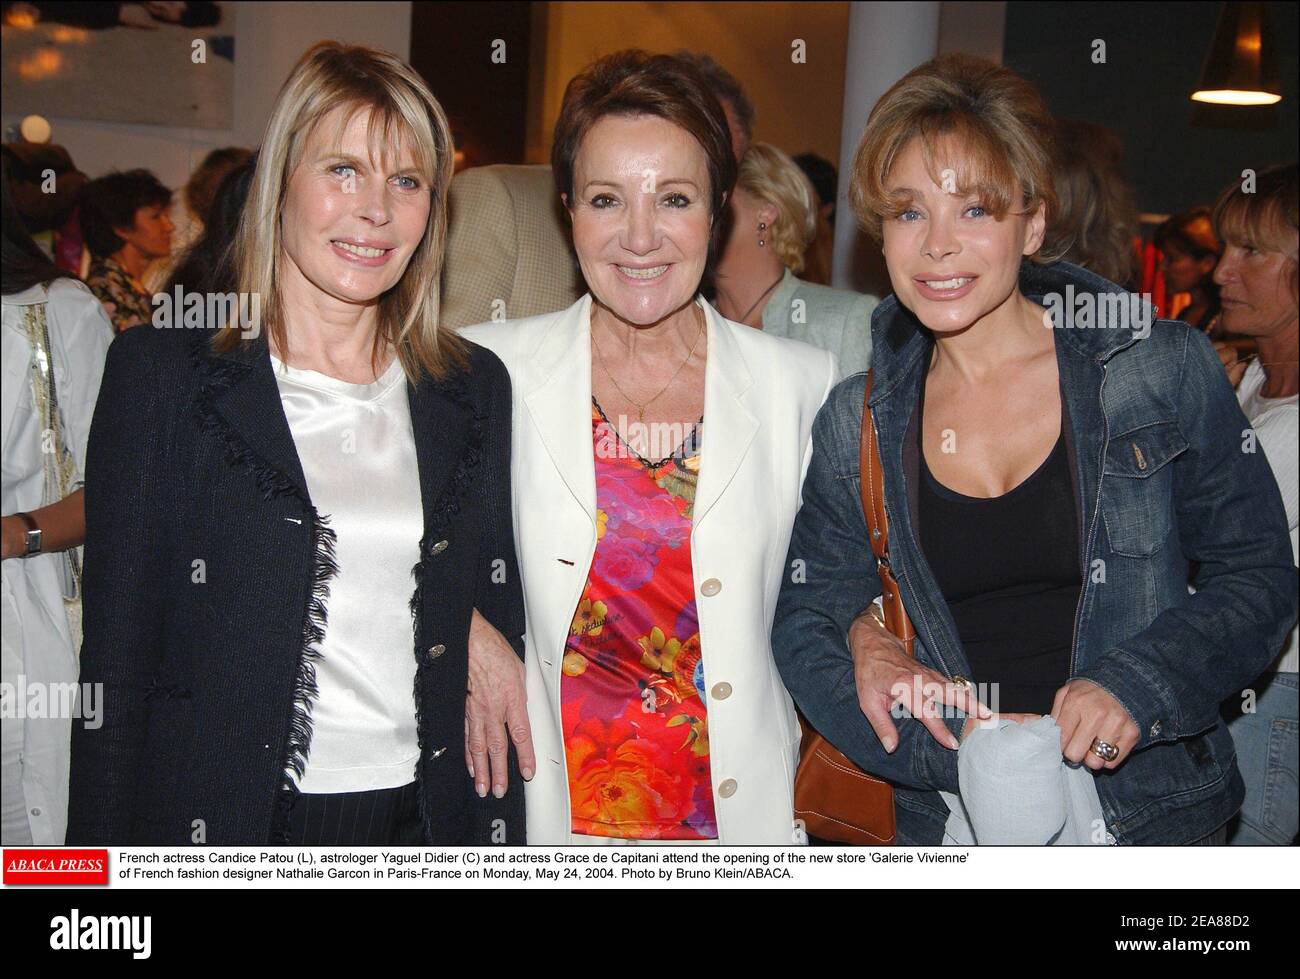 French actress Candice Patou (L), astrologer Yaguel Didier (C) and actress Grace de Capitani attend the opening of the new store 'Galerie Vivienne' of French fashion designer Nathalie Garcon in Paris-France on Monday, May 24, 2004. Photo by Bruno Klein/ABACA. Stock Photo